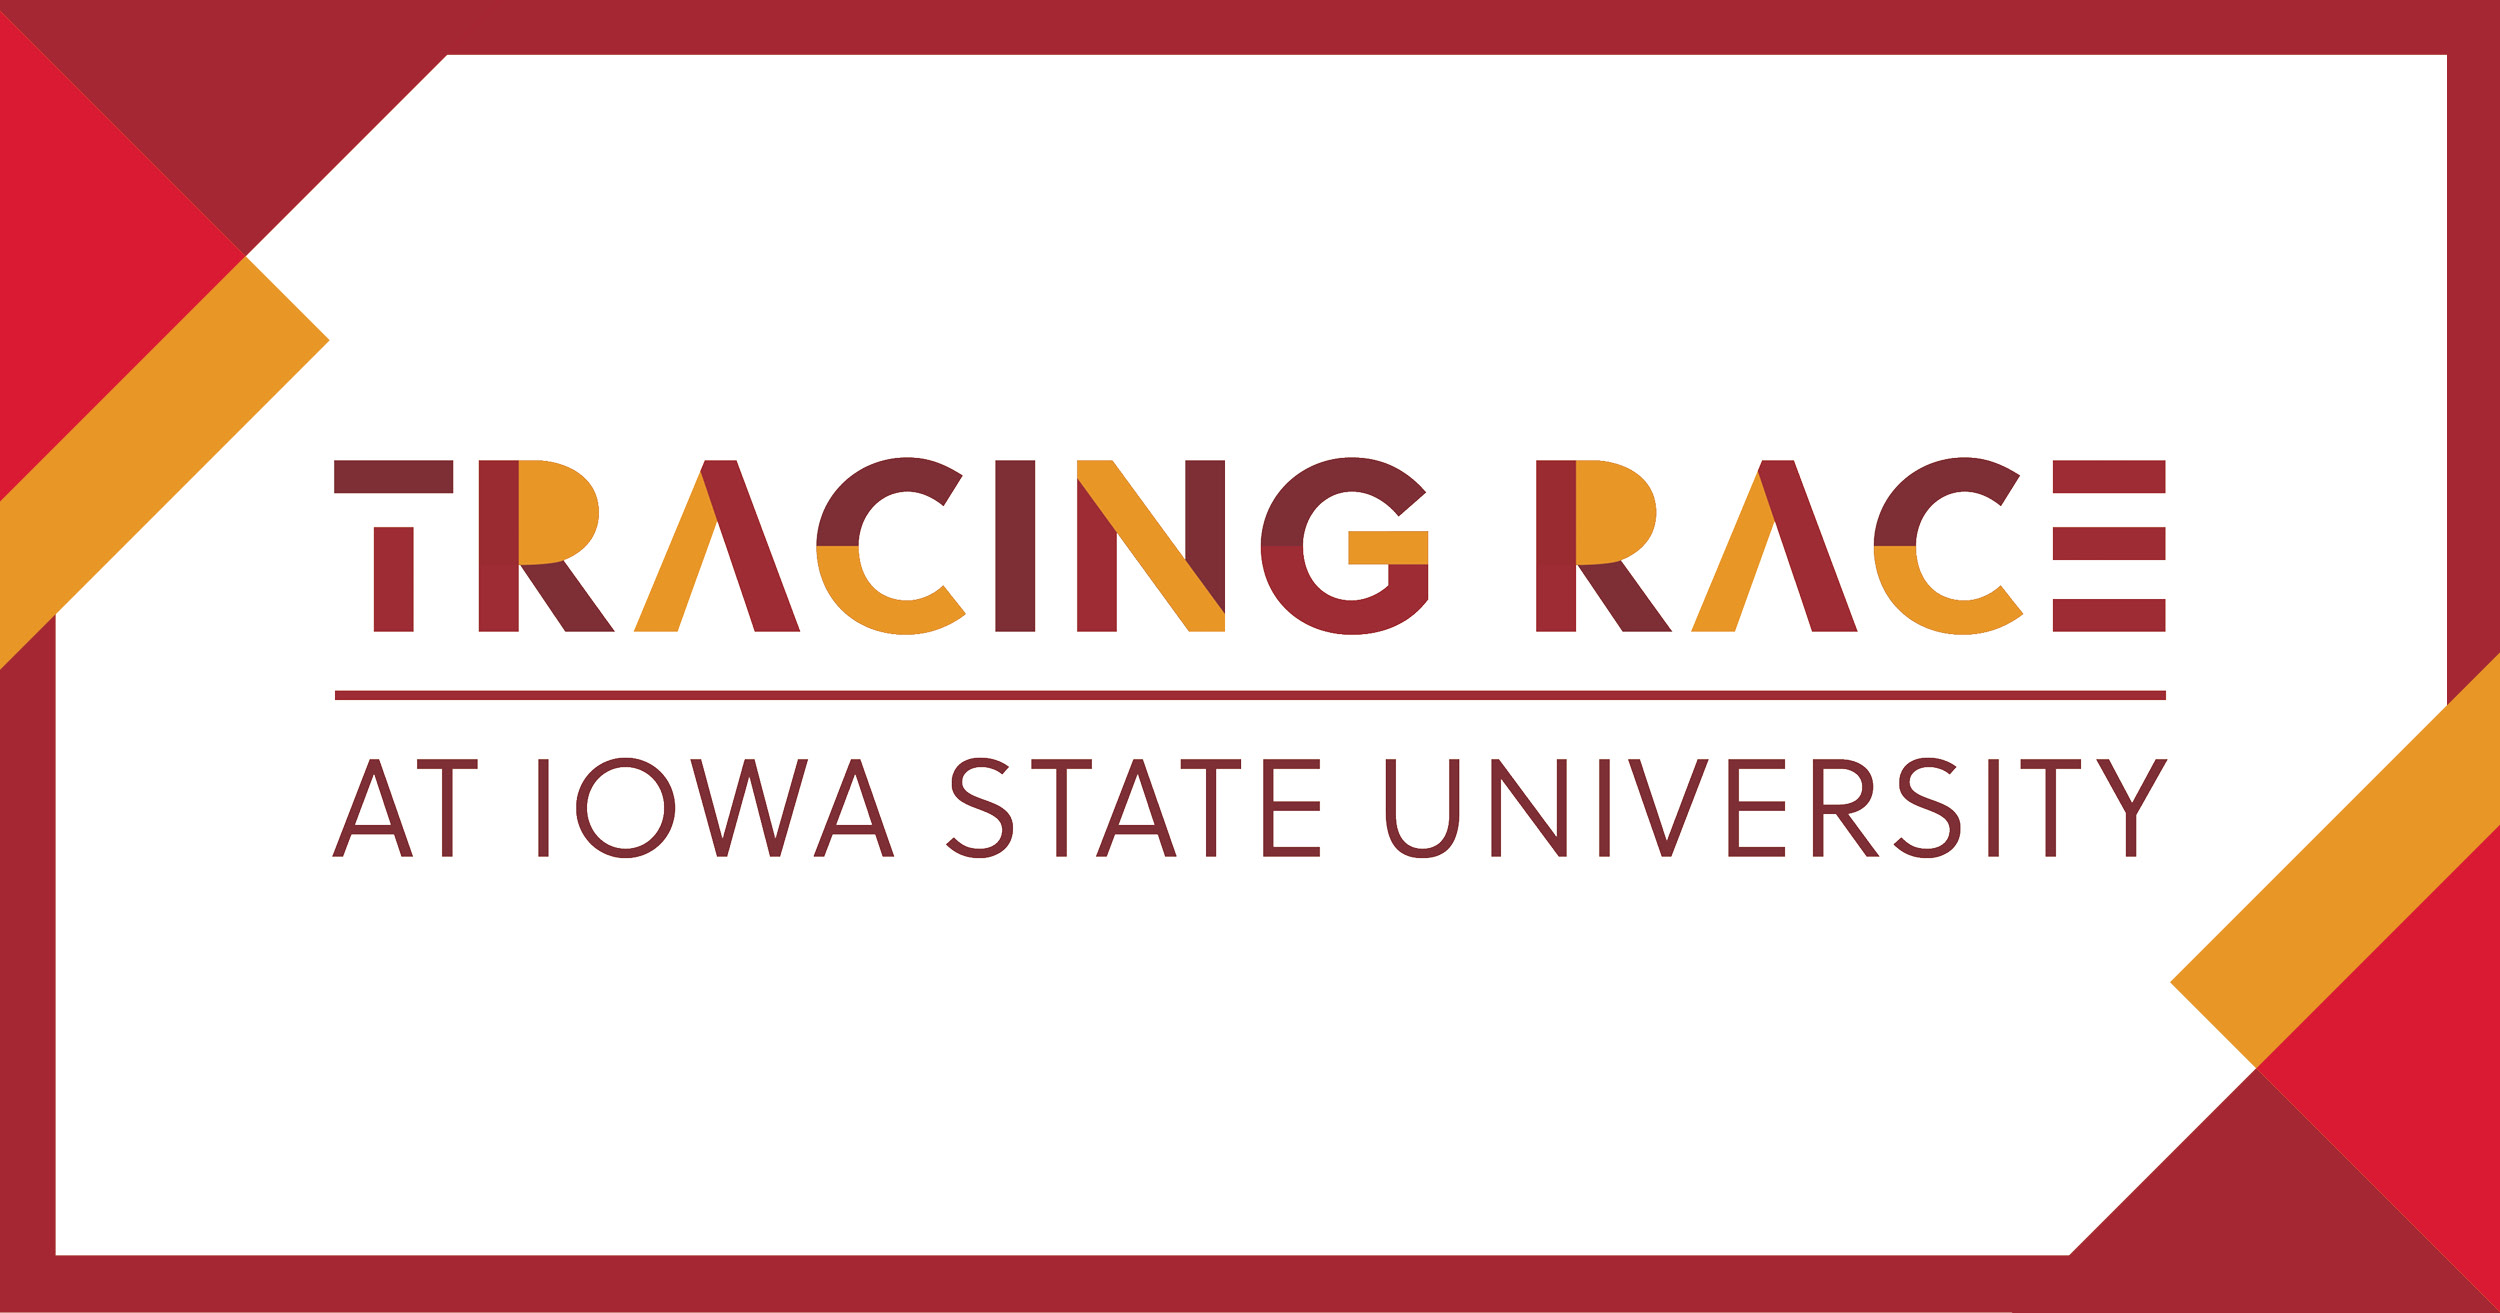 Tracing Race logo graphic.